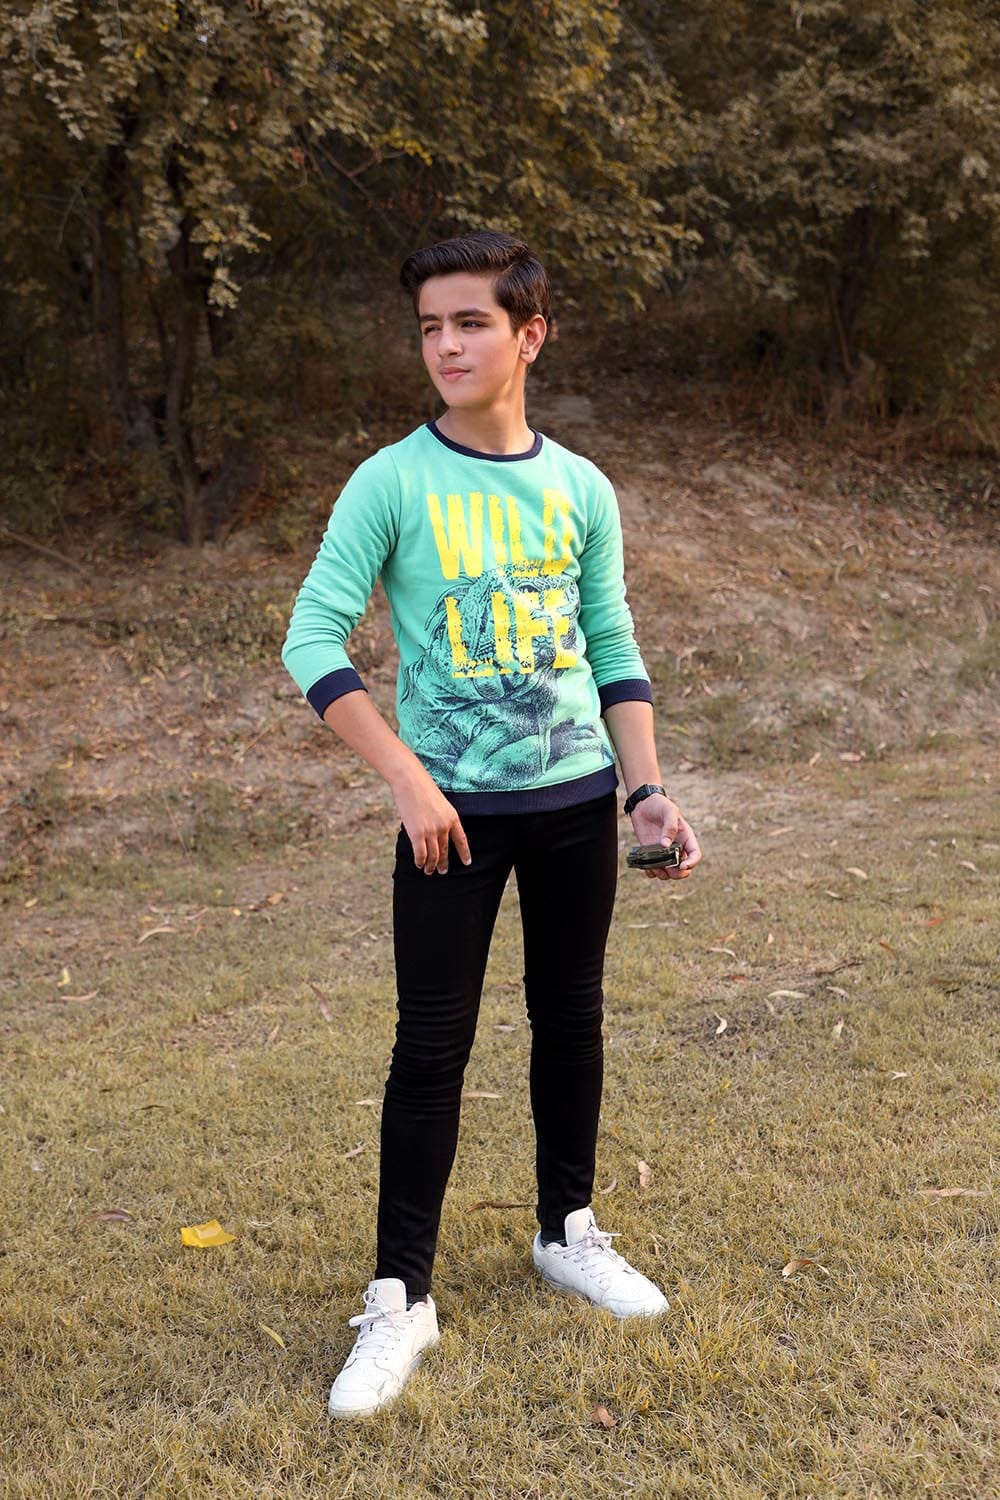 Hope Not Out by Shahid Afridi Boys Knit Sweat Shirt Overall Printed Sweatshirt